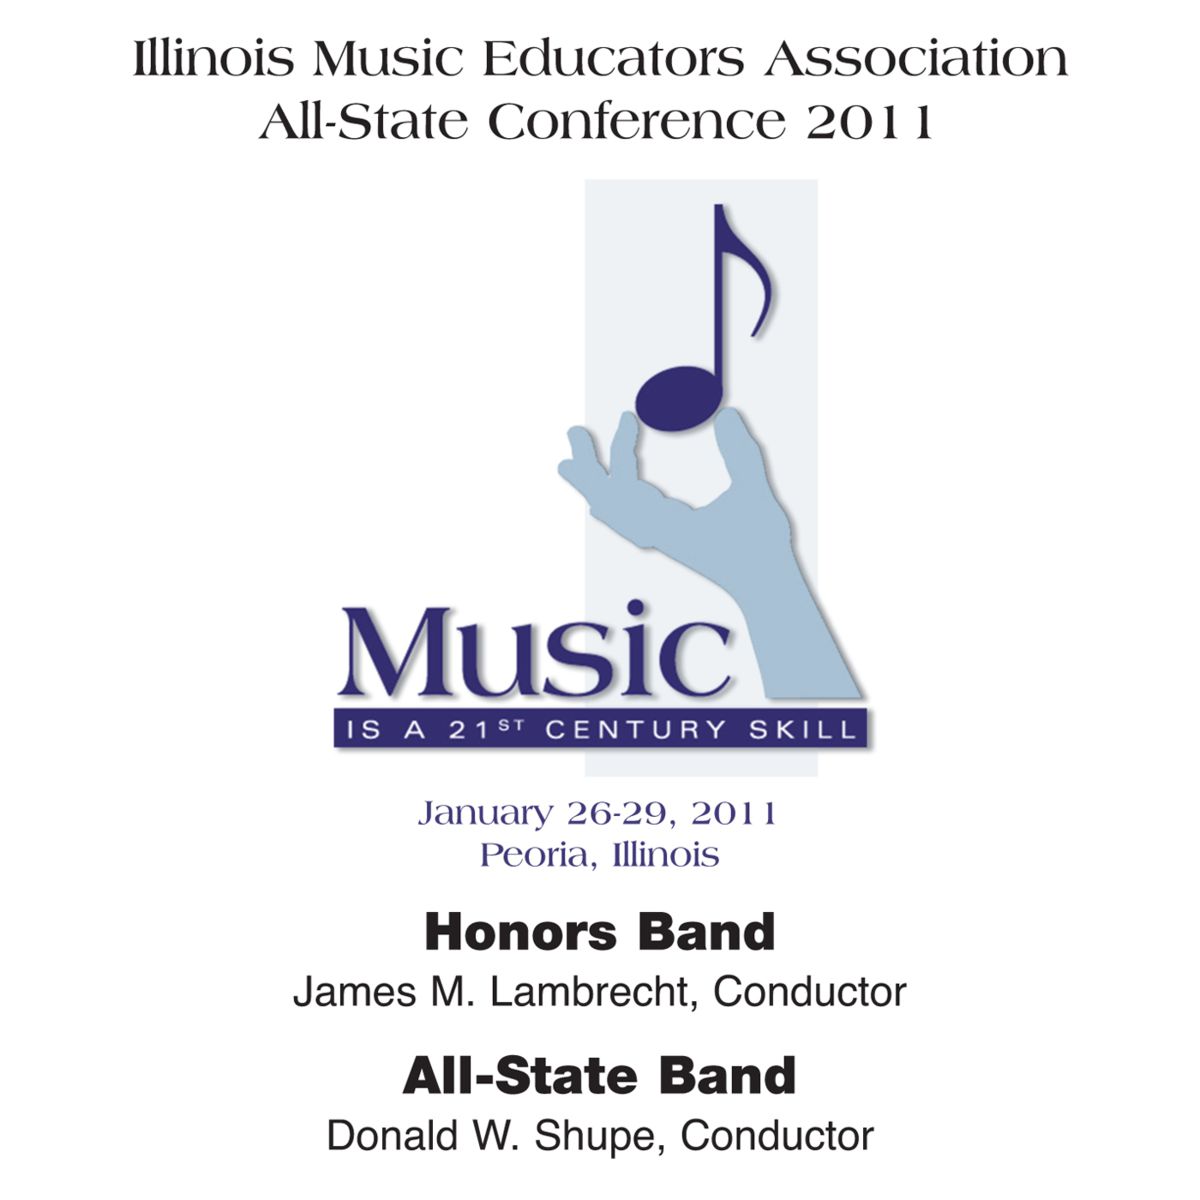 2011 Illinois Music Educators Association: Honors Band and All-State Band - clicca qui